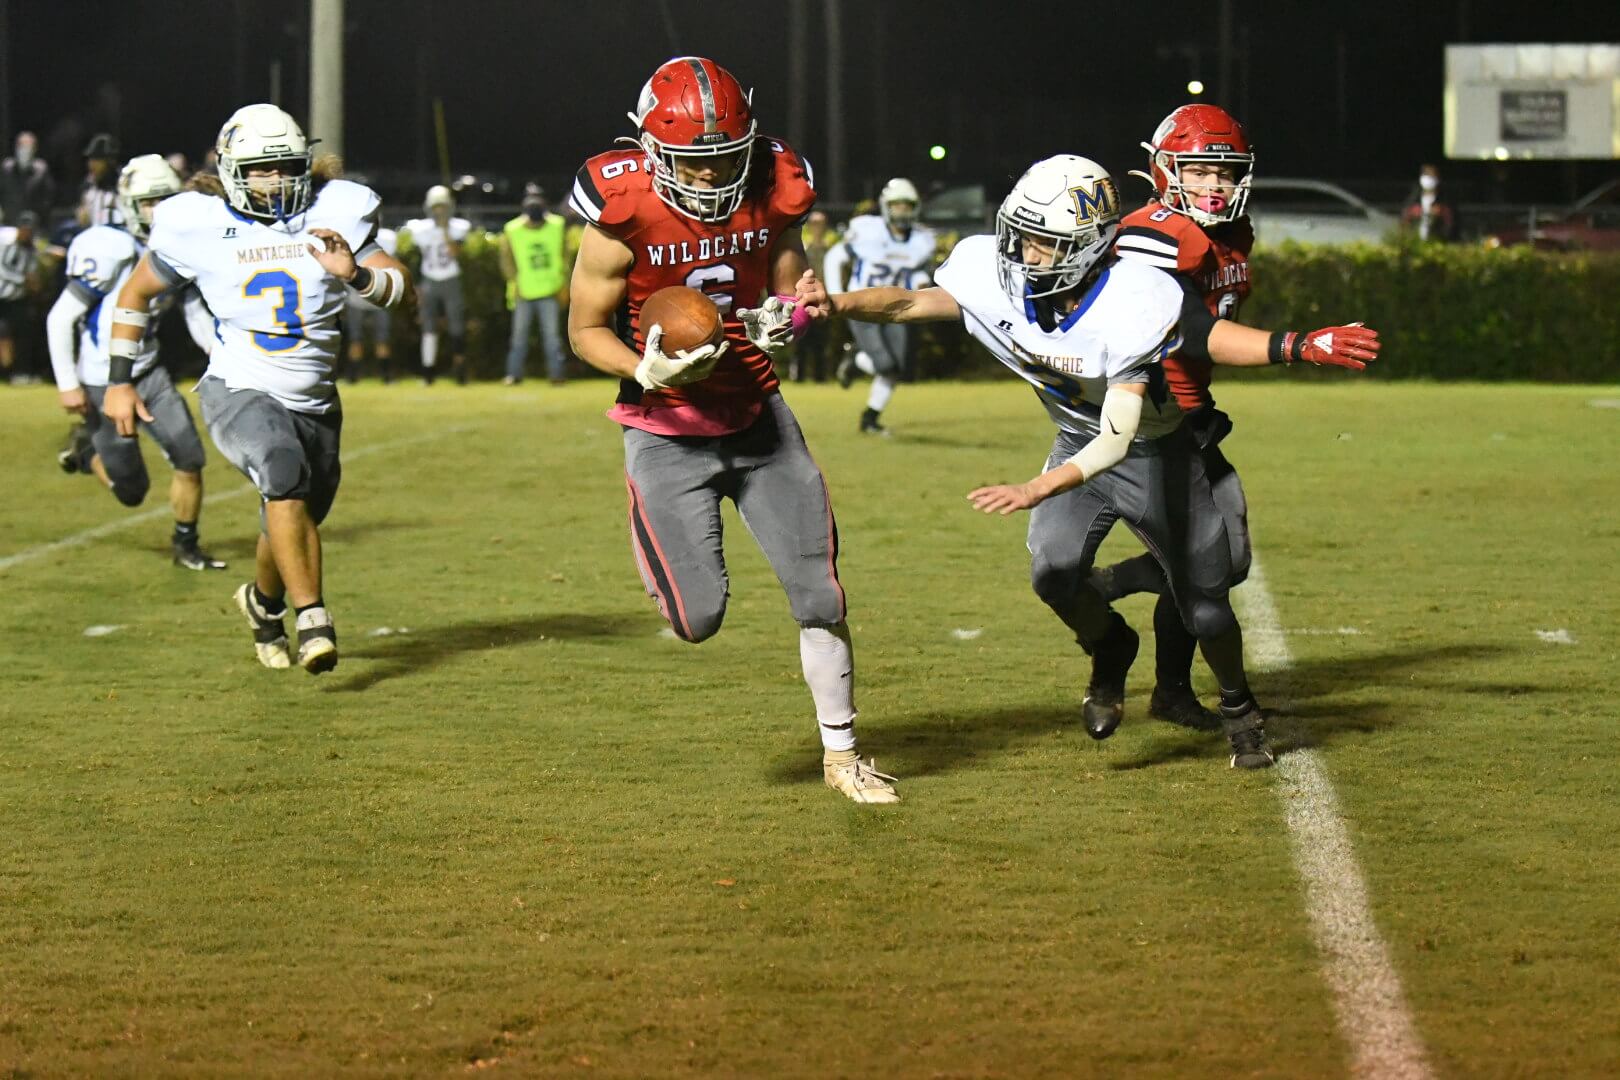 Walnut clinches home field in first round of playoffs with tough win over Mantachie